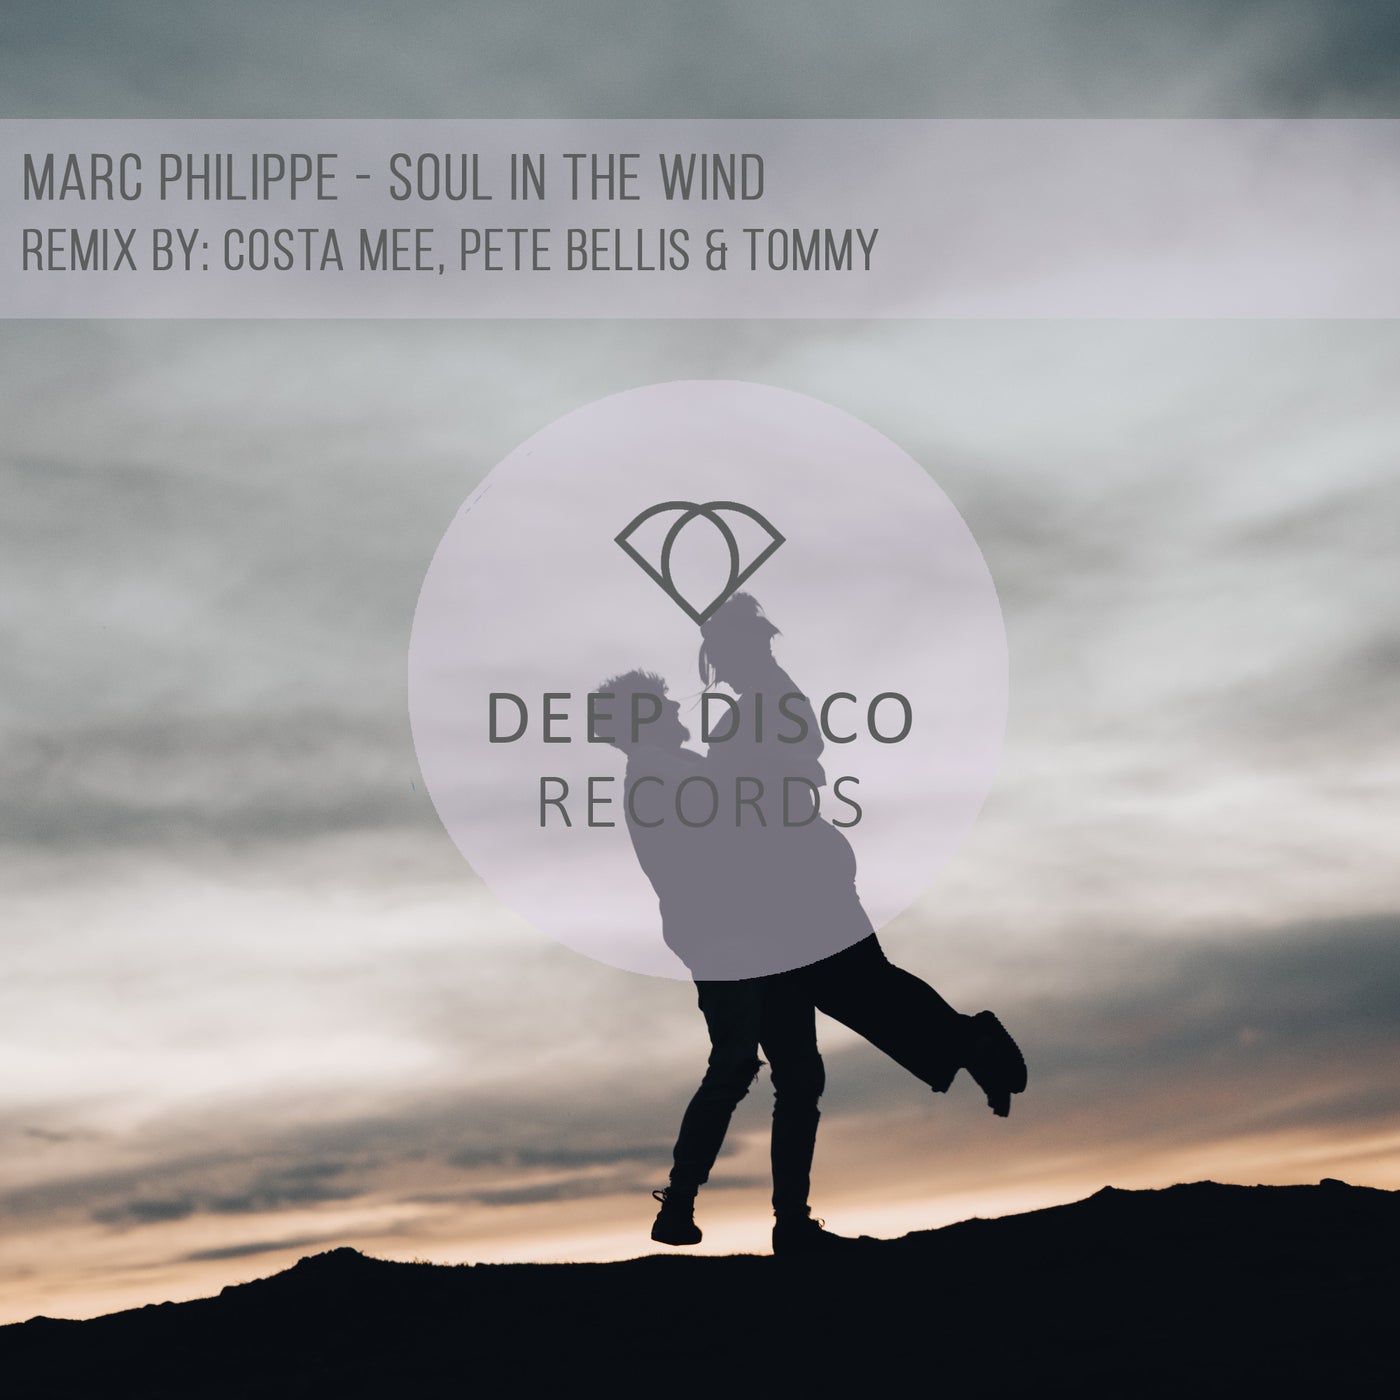 Marc costa. Marc Philippe - Soul in the Wind. Costa mee & Pete Bellis & Tommy. Marc Philippe Dancer in the Dark. Costa mee 2021.